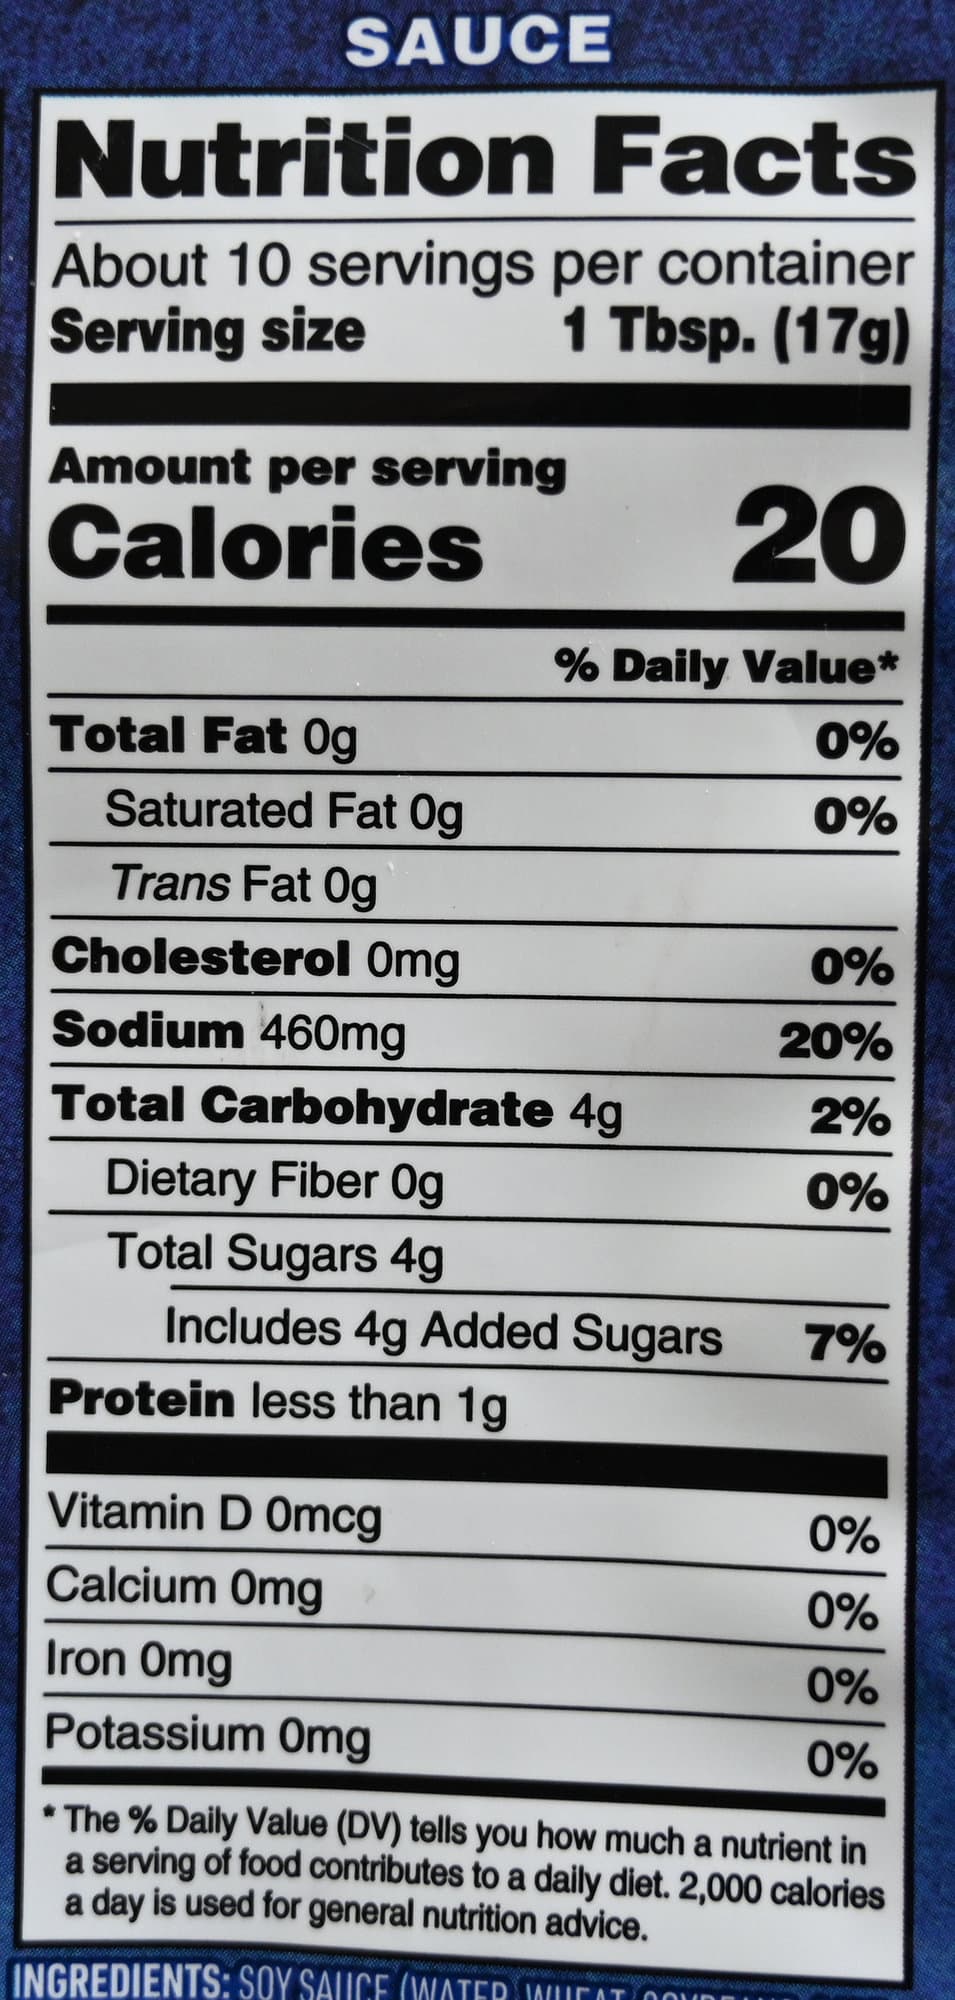 Image of the sauce nutrition facts from the back of the bag.